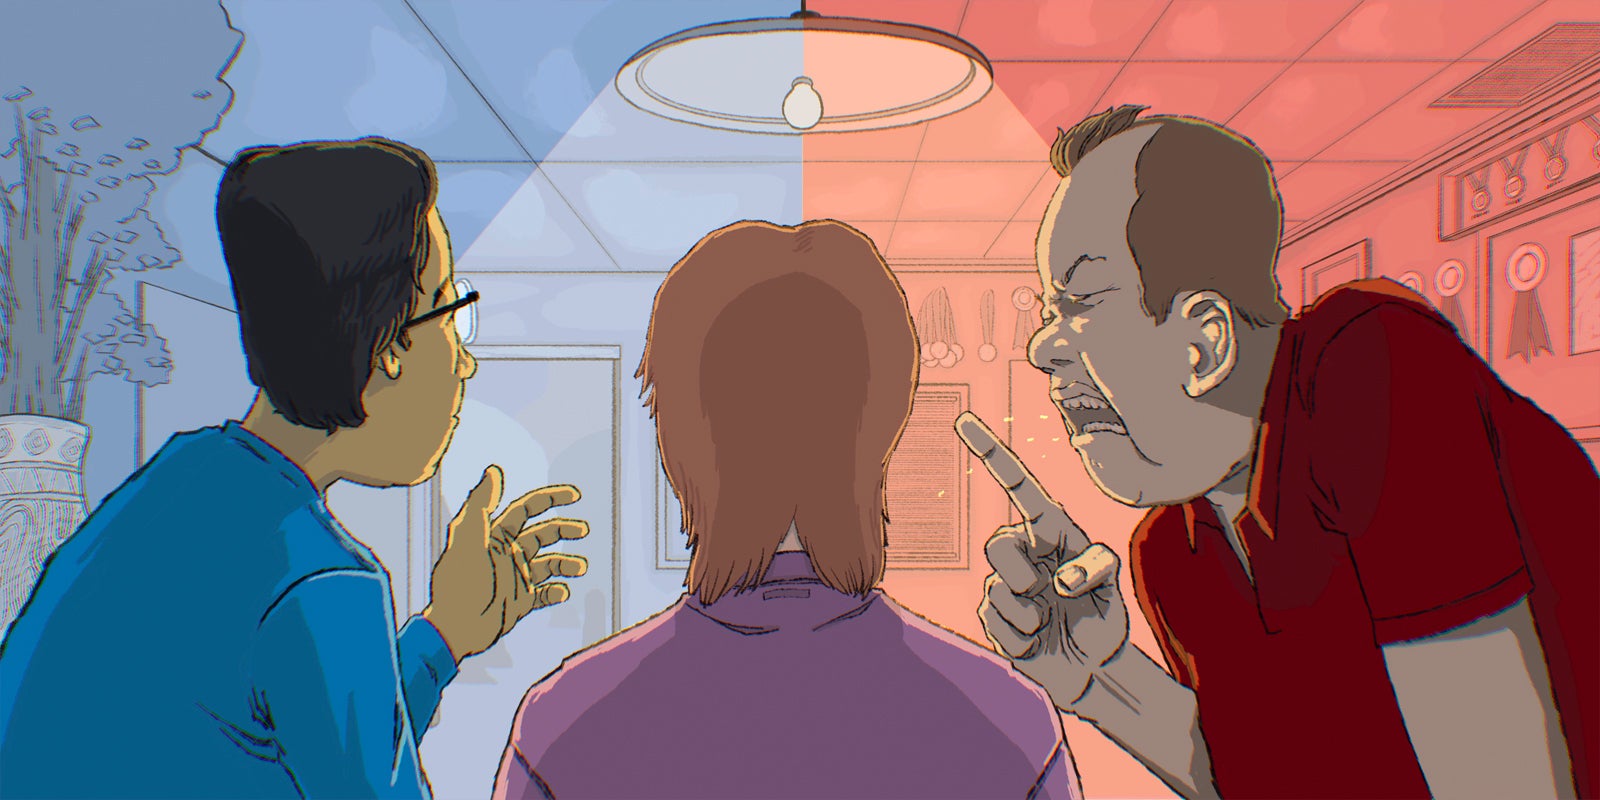 illustration of a person being coached at work from behind with a split screen of a good coach in blue on the left who looks to be explaining something in an empowering way and a bad coach on the right who is angrily looking at his coachee, shaking his finger, showing this blog will be discussing the effectiveness of manager coaching